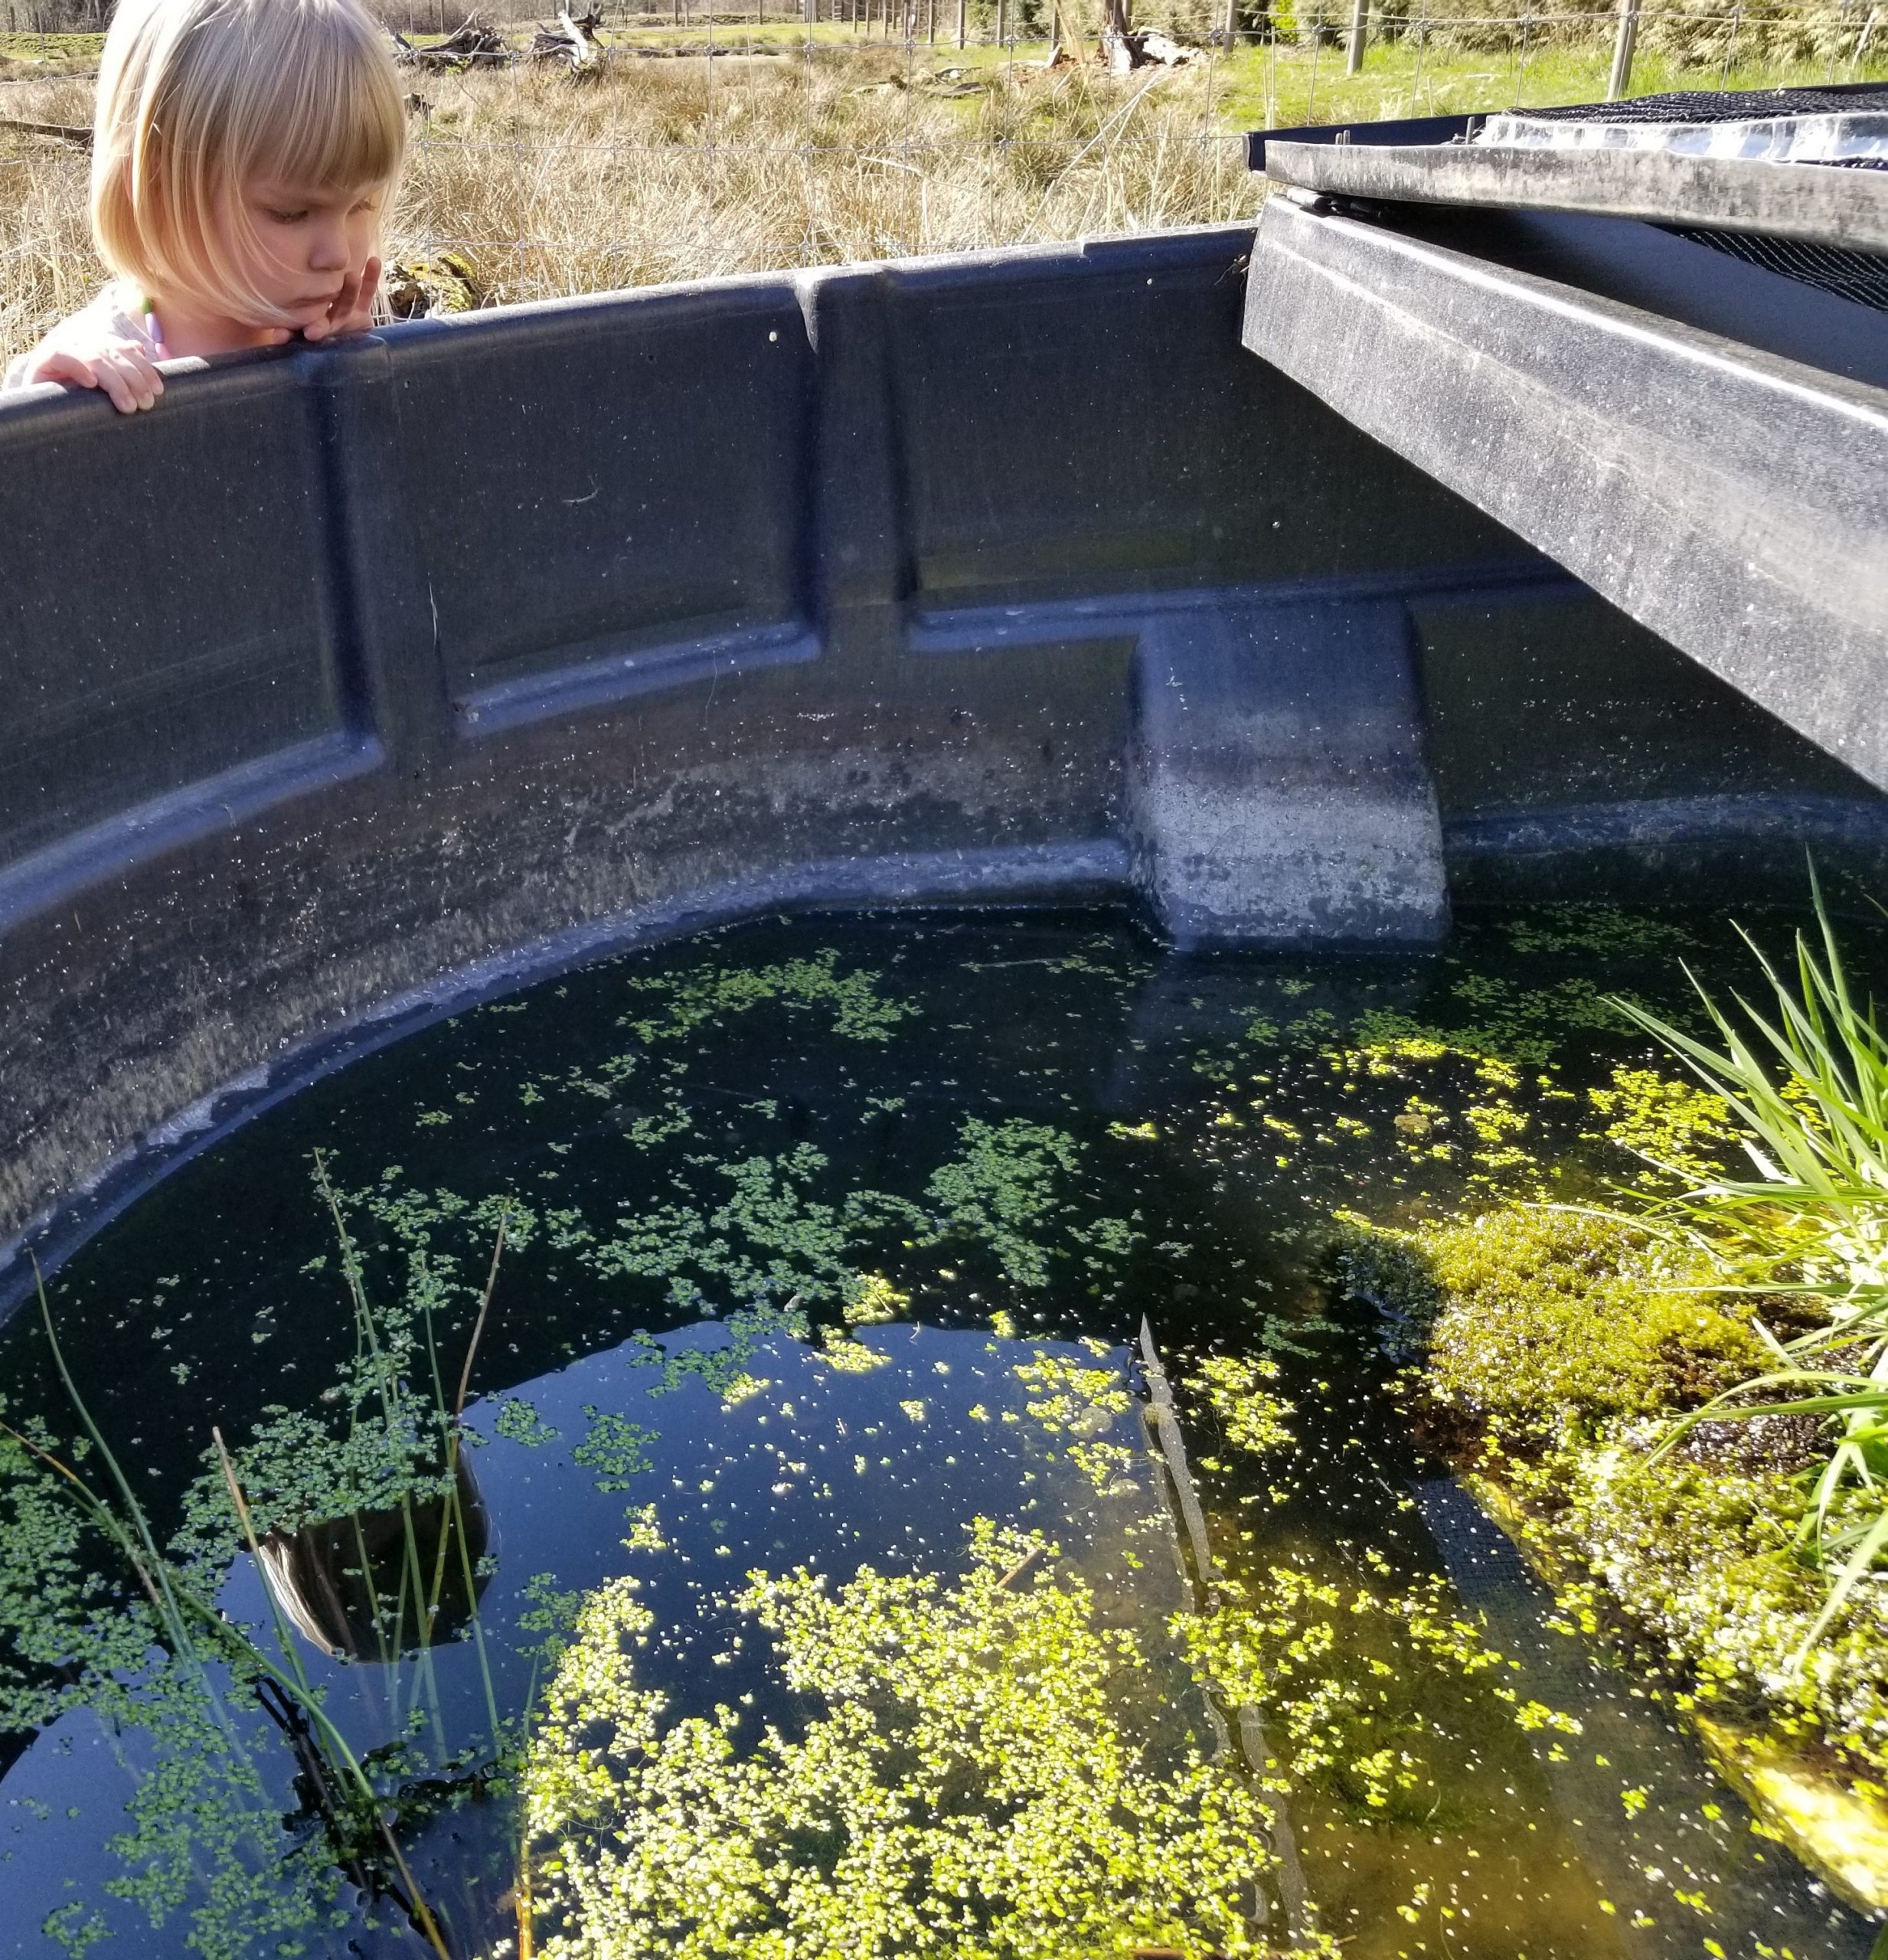 Large 300 gallon tubs are used for Oregon spotted frog breeding and for raising tadpoles before release.